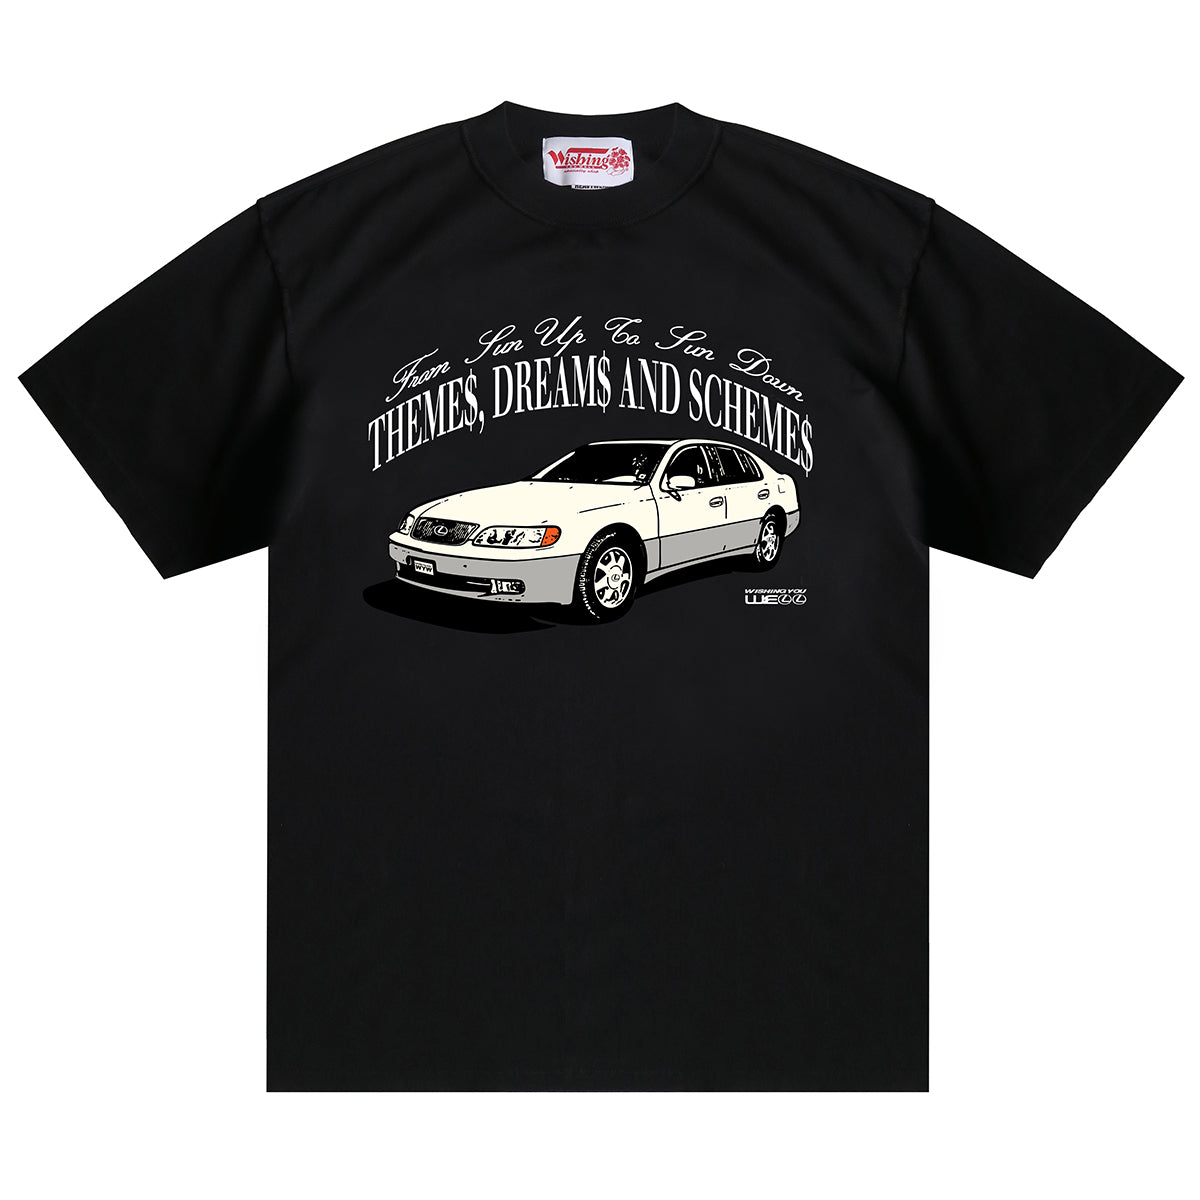 THEMES, DREAMS AND SCHEMES (93' LEXUS GS 300 REVERSE TEE/BLACK GD)